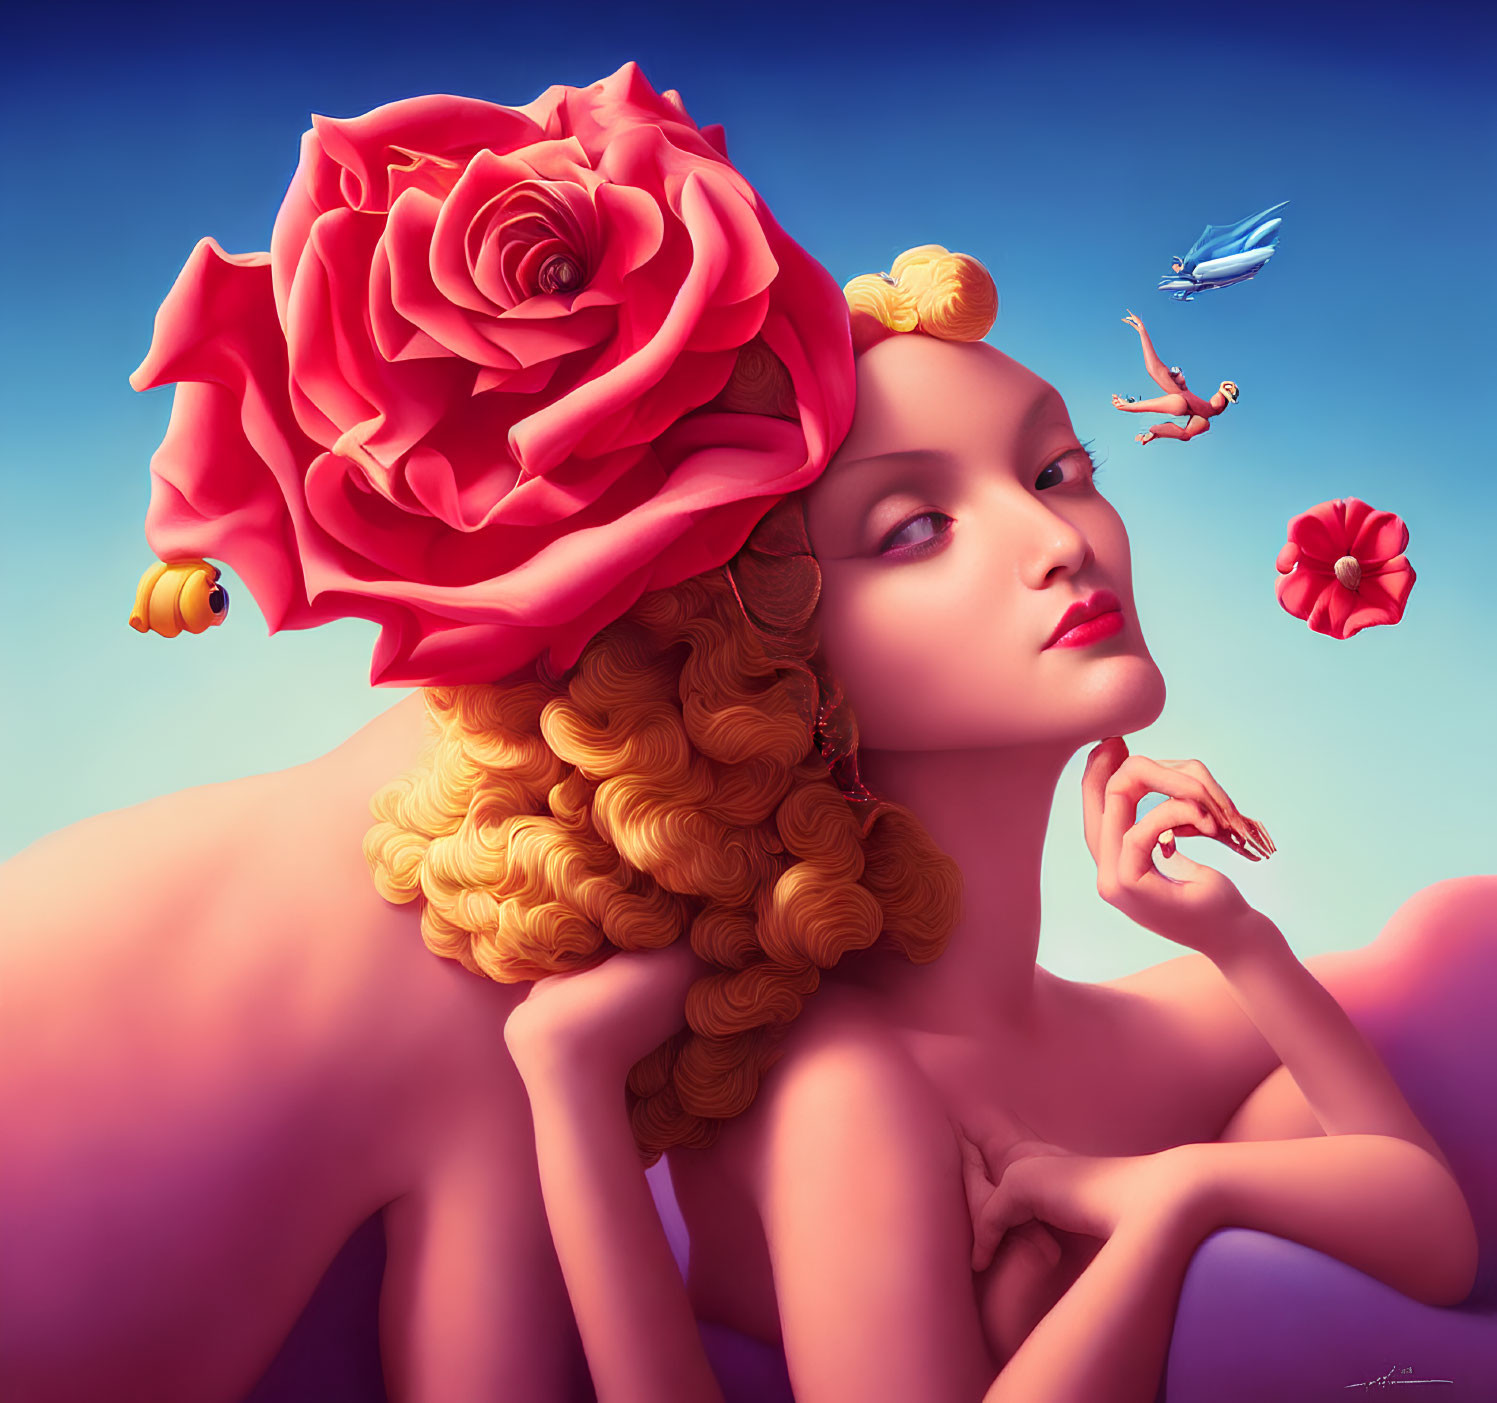 Stylized painting of woman with red rose hair and flying characters on blue gradient.